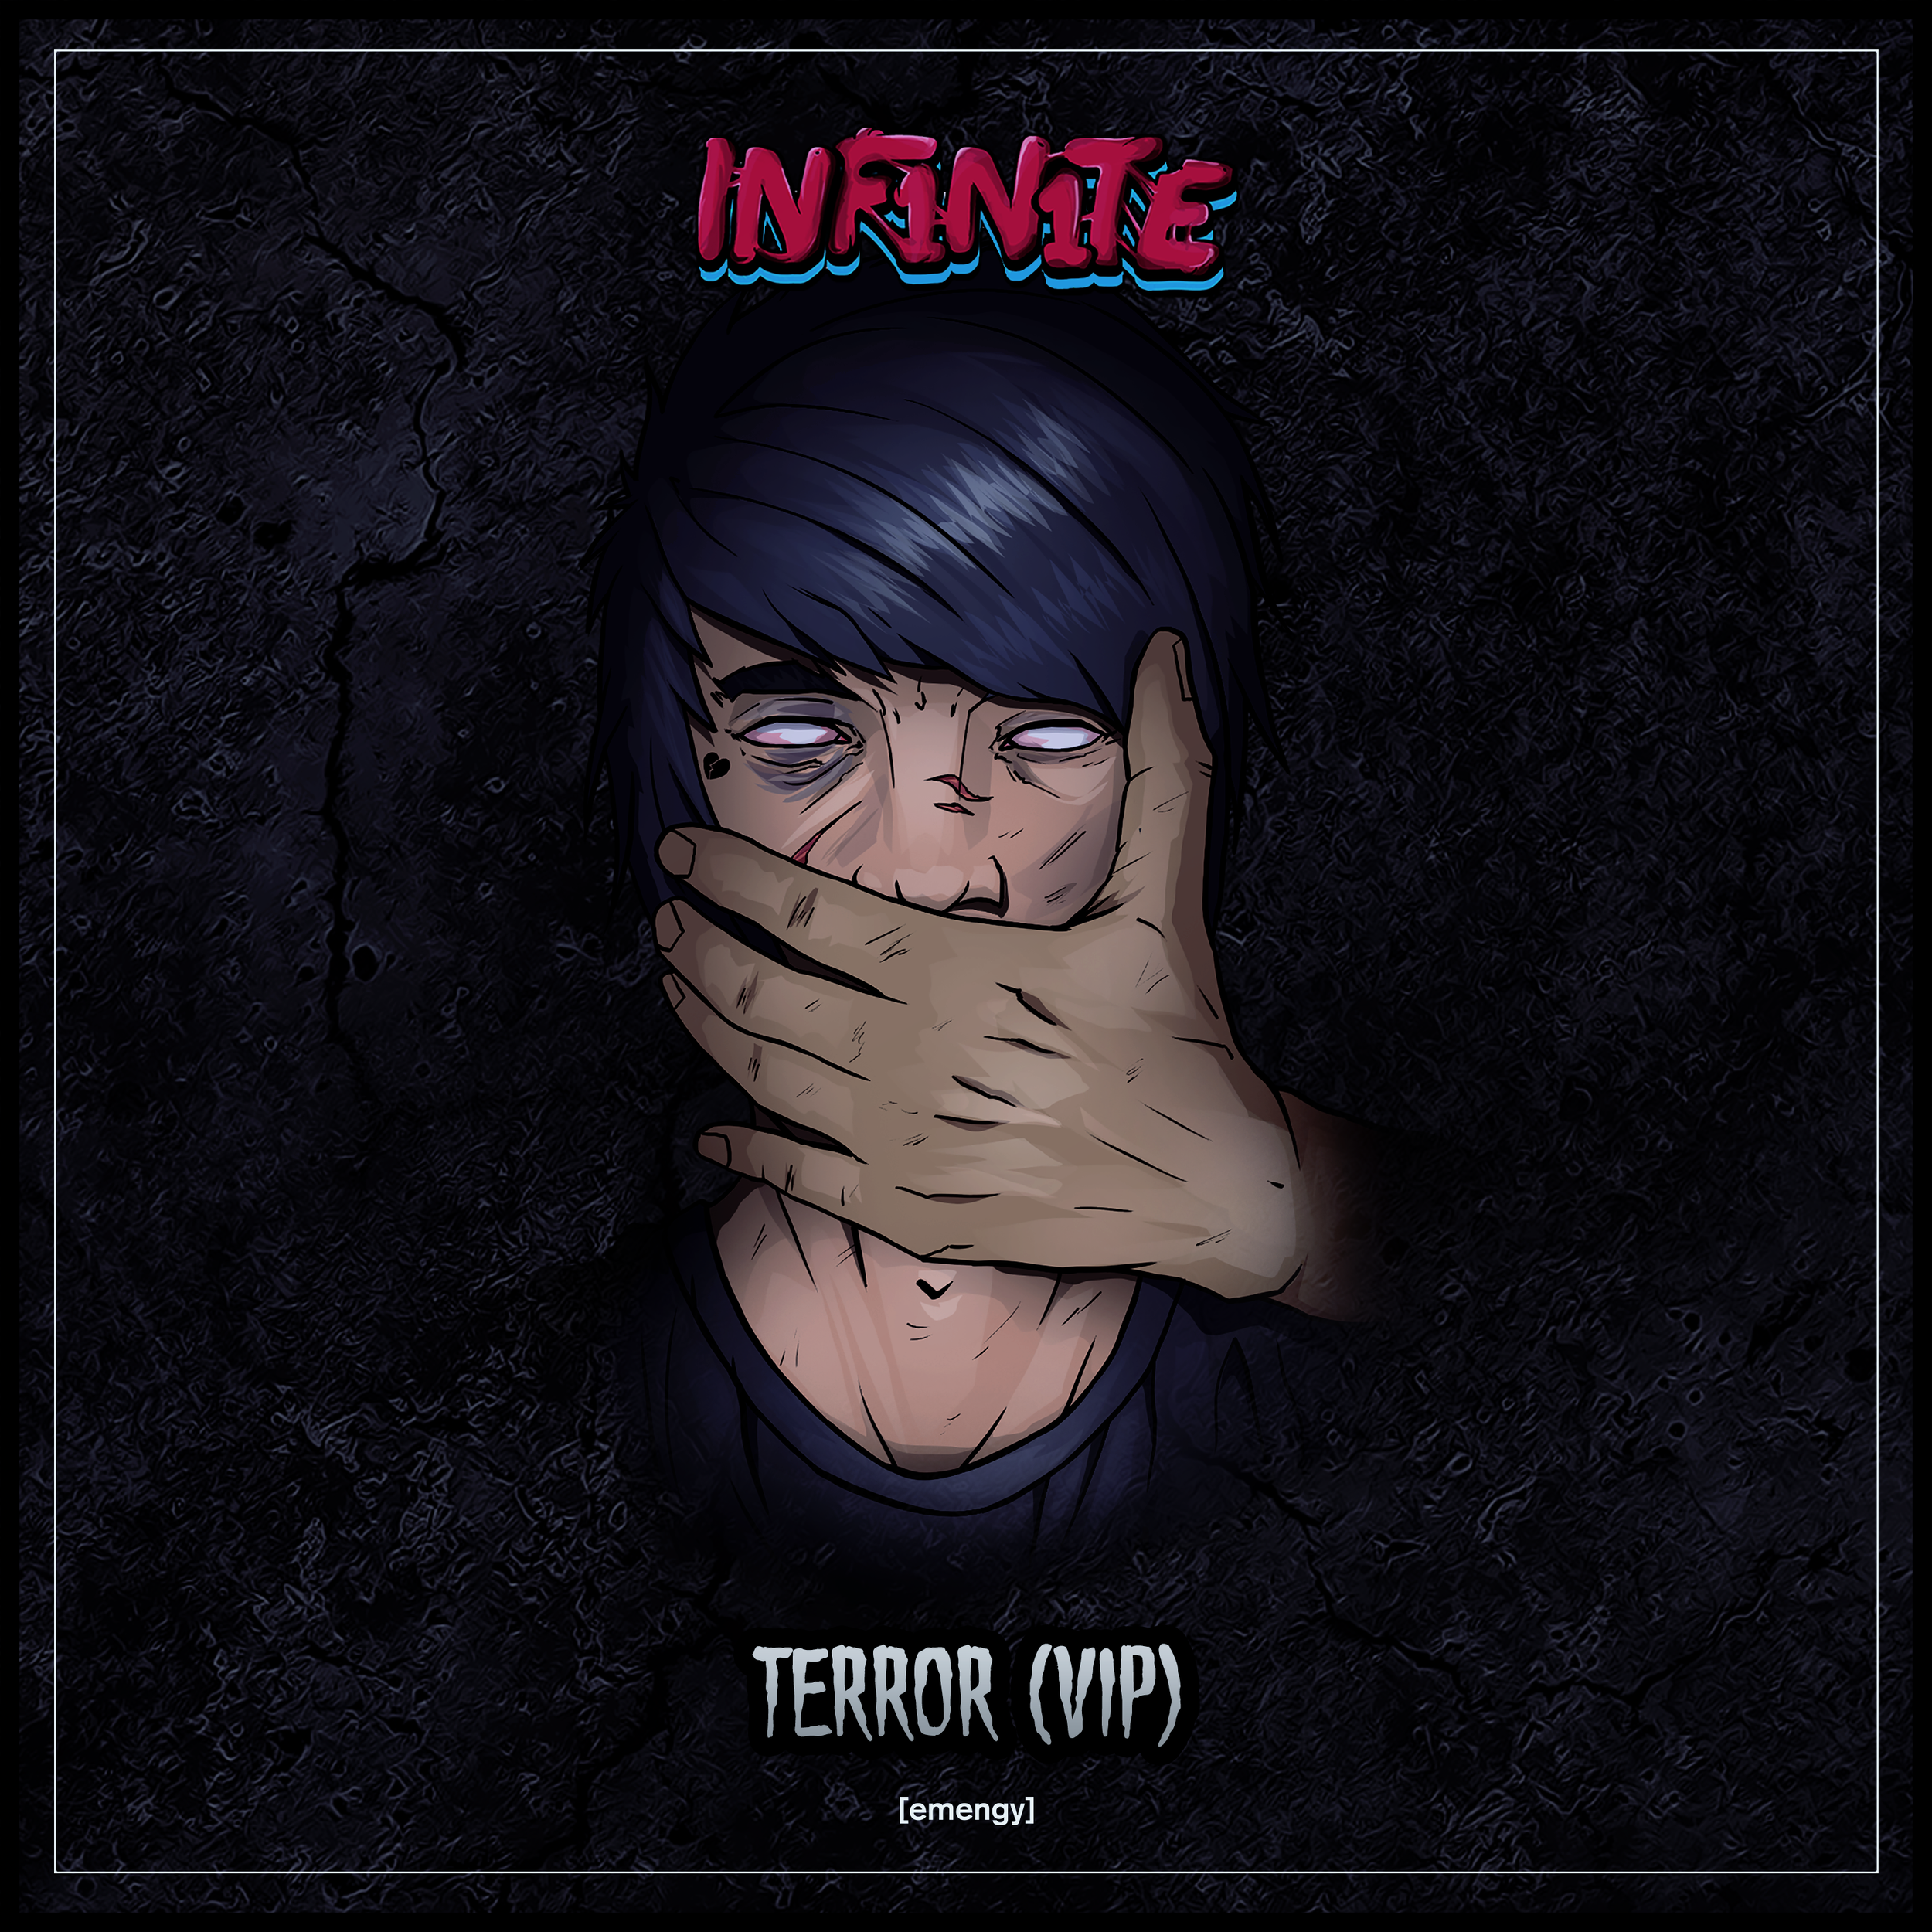 TERROR VIP (Cover).png